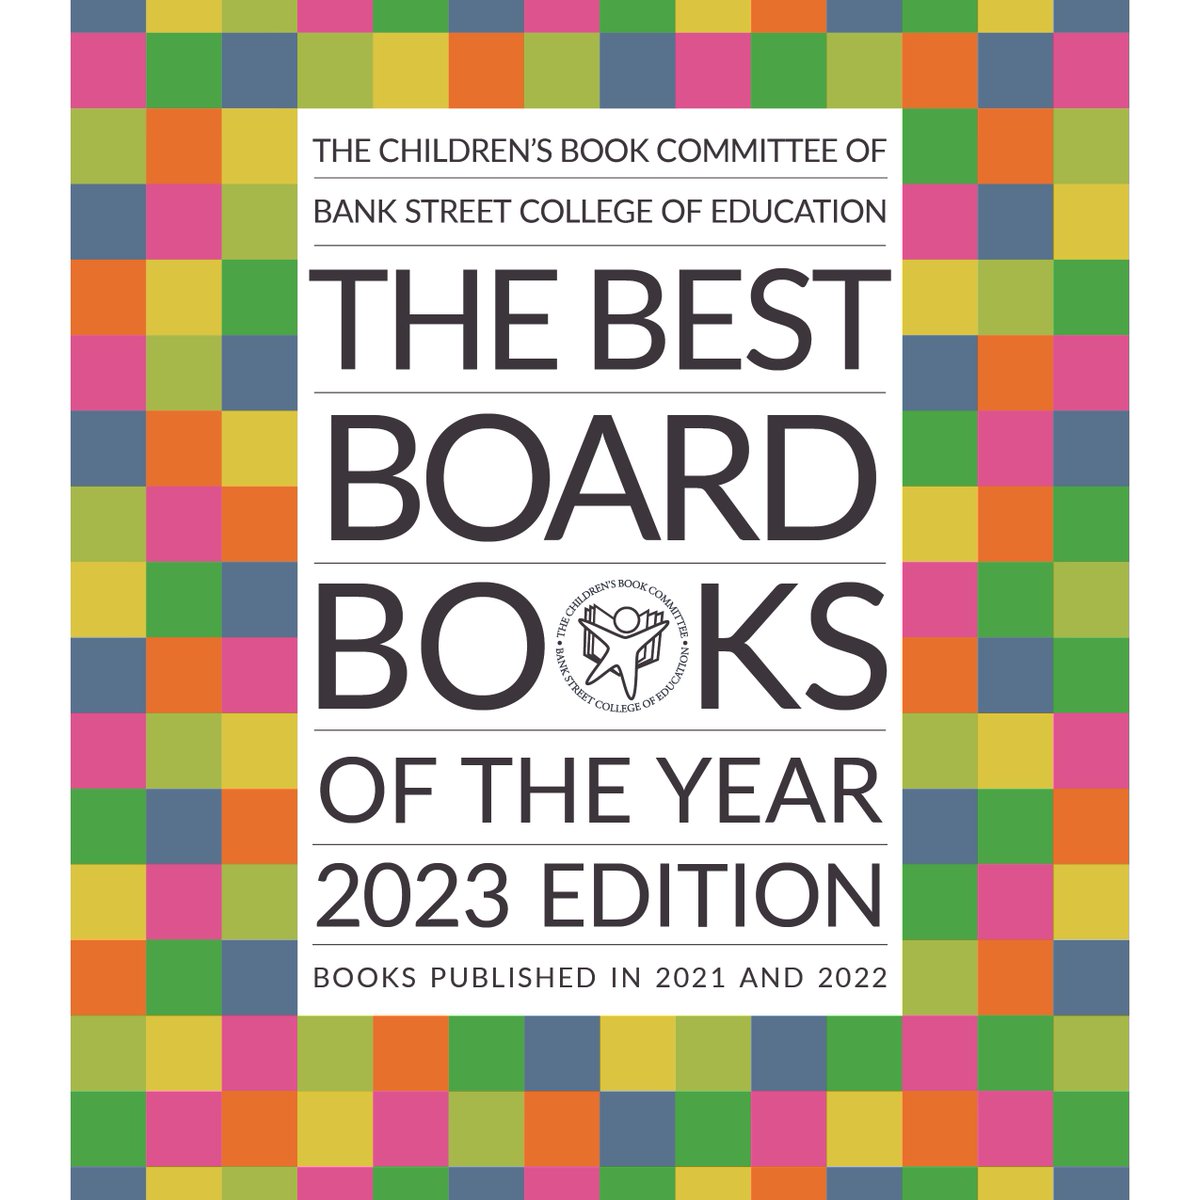 Don't miss the Children's Book Committee's new Best Board Books 2023 list for books published in 2021 and 2022! educate.bankstreet.edu/ccl/22/ Each is a jewel!
@NAEYC  @molliewk #bankstreetcbc #bankstreetccl